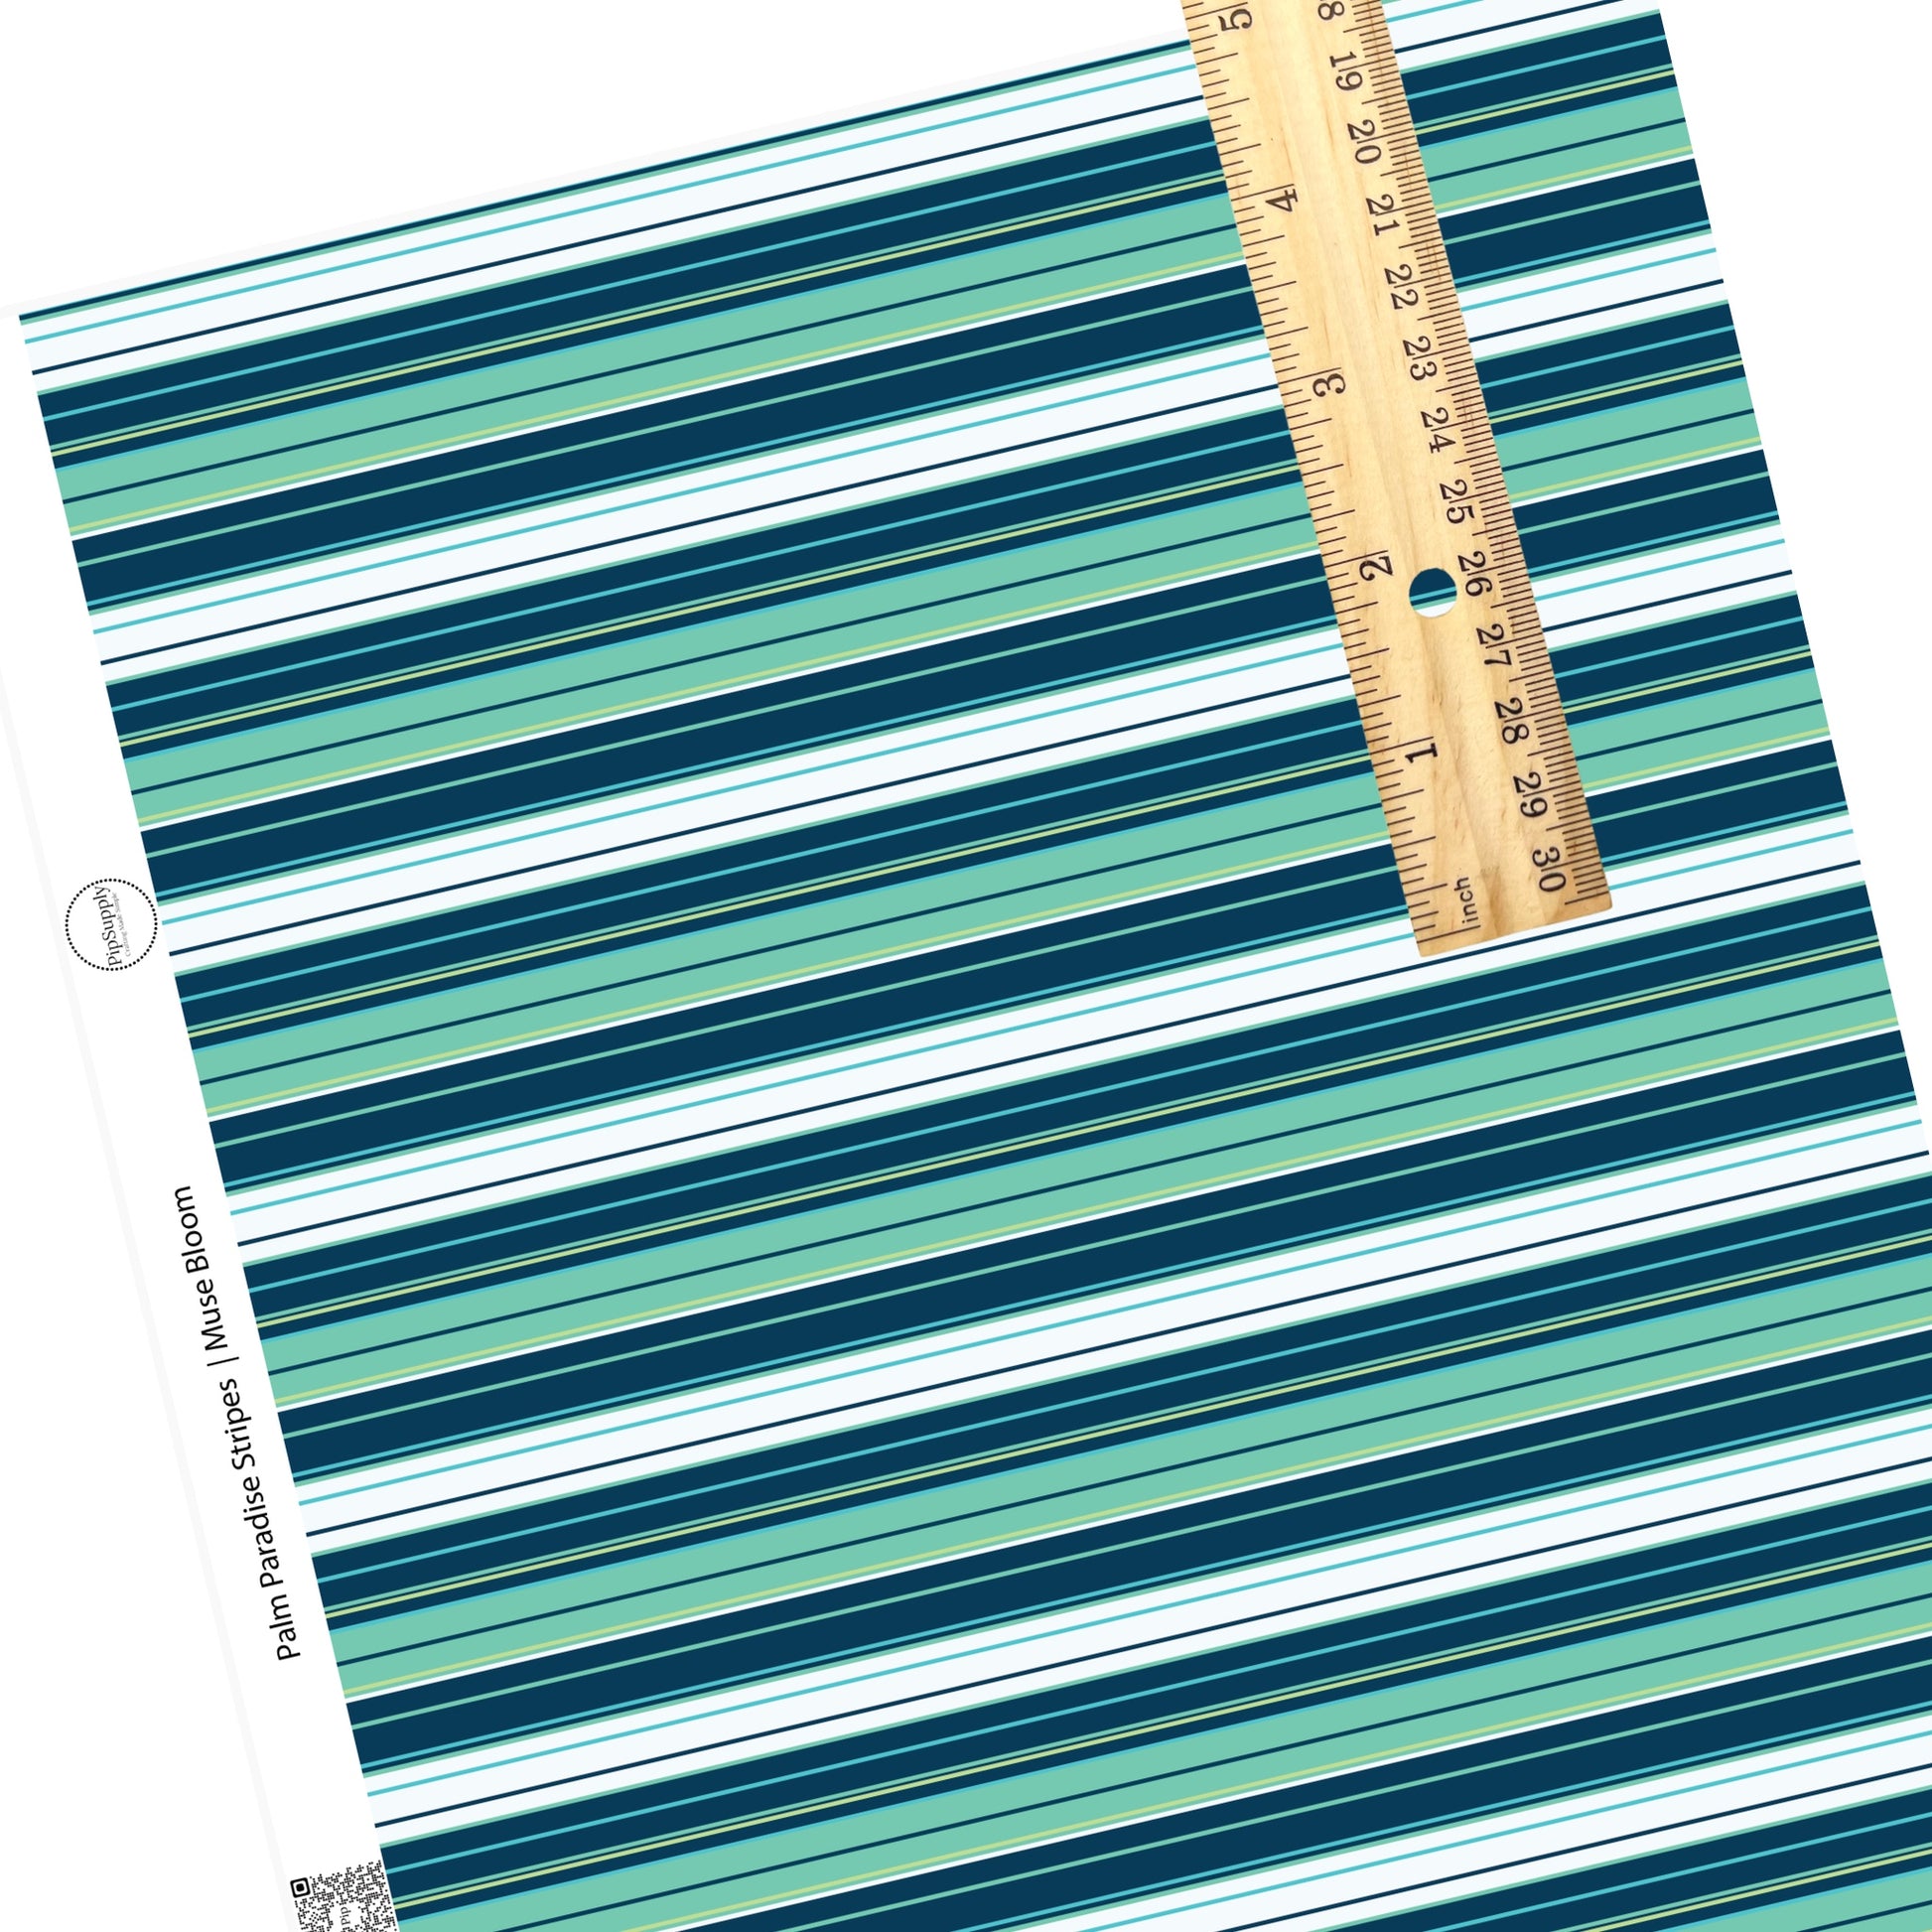 Tropical stripes in aqua, teal, light blue, light green, and dark navy faux leather sheet. 